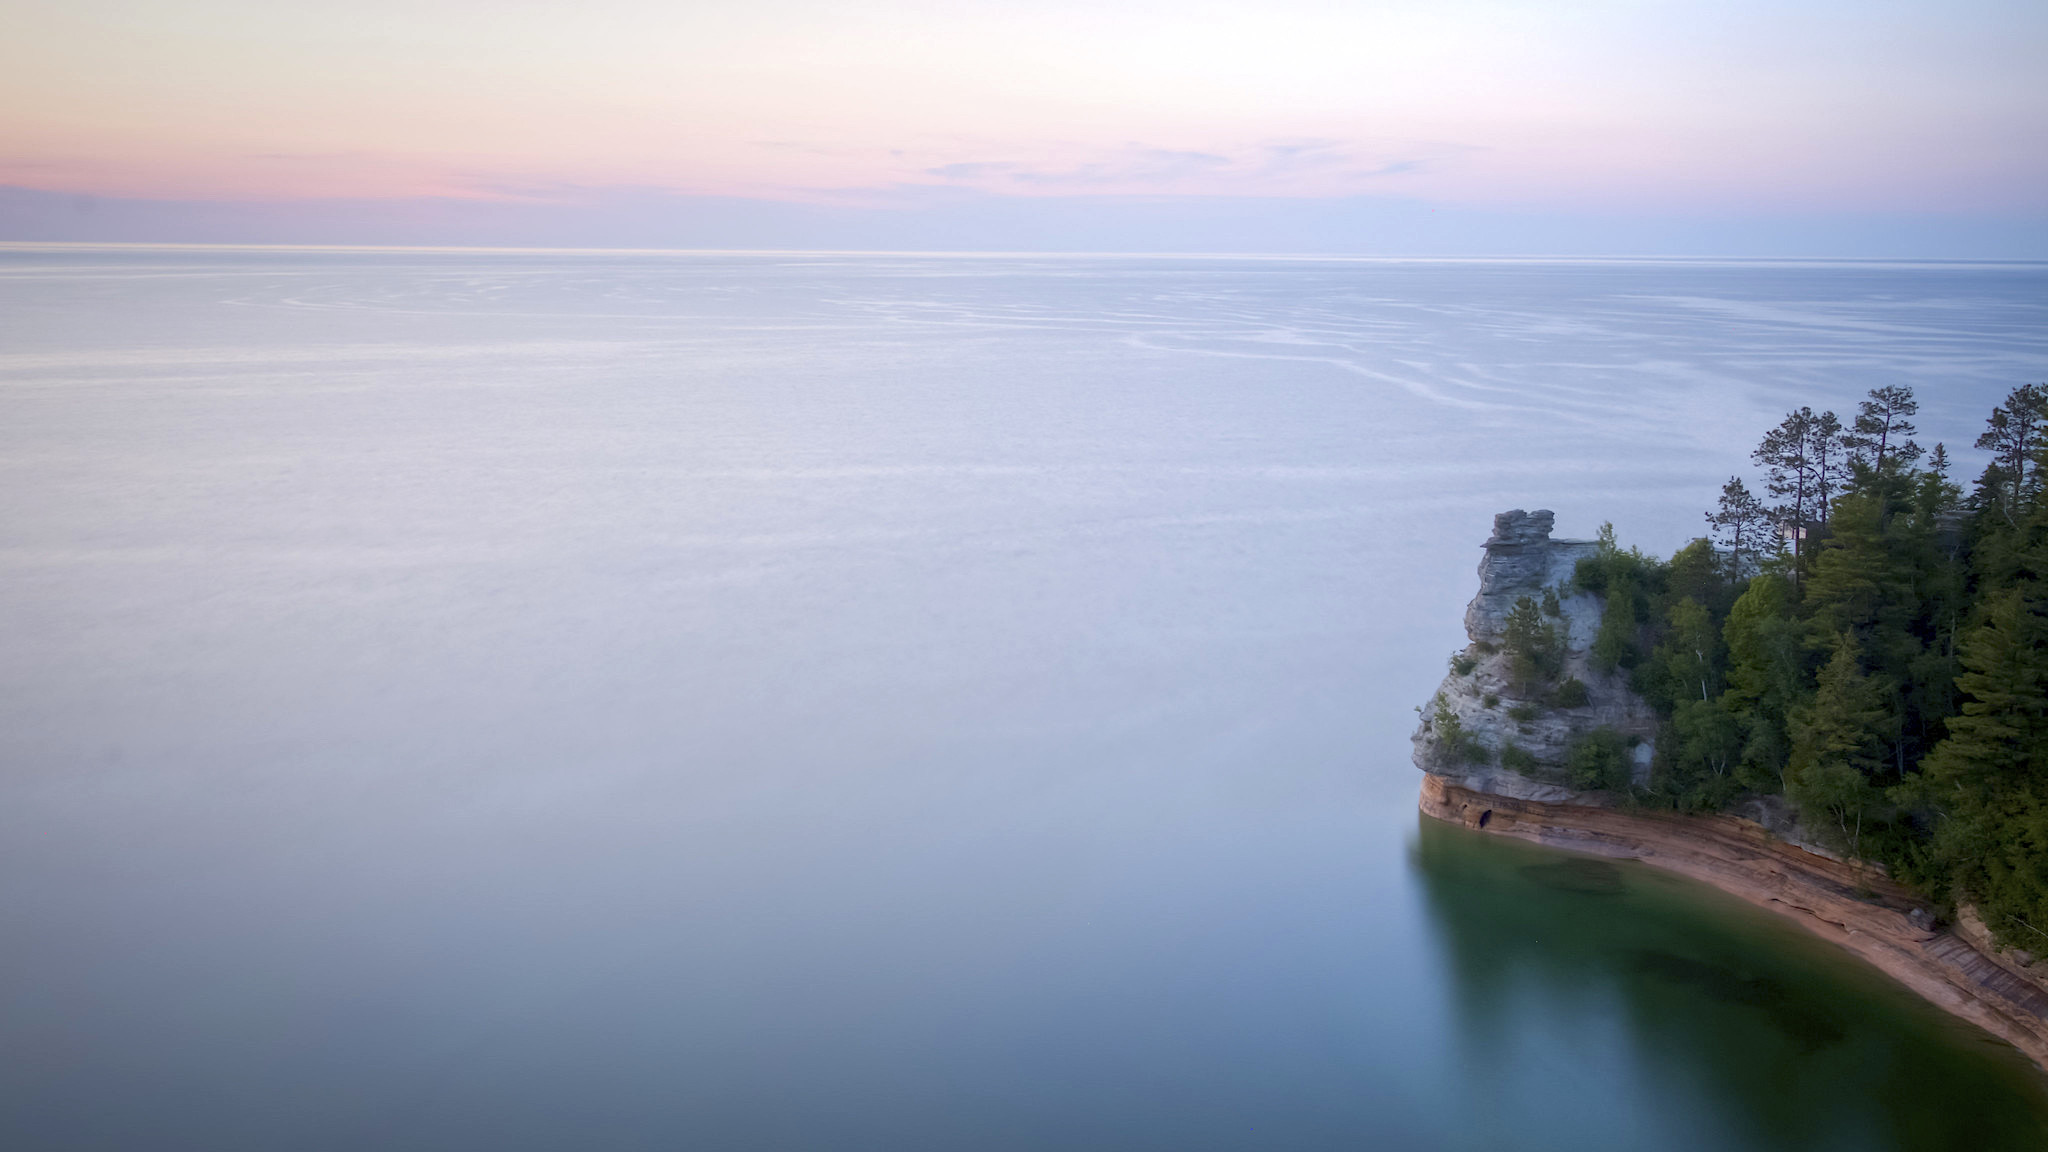 Pictured Rocks on Lake Superior